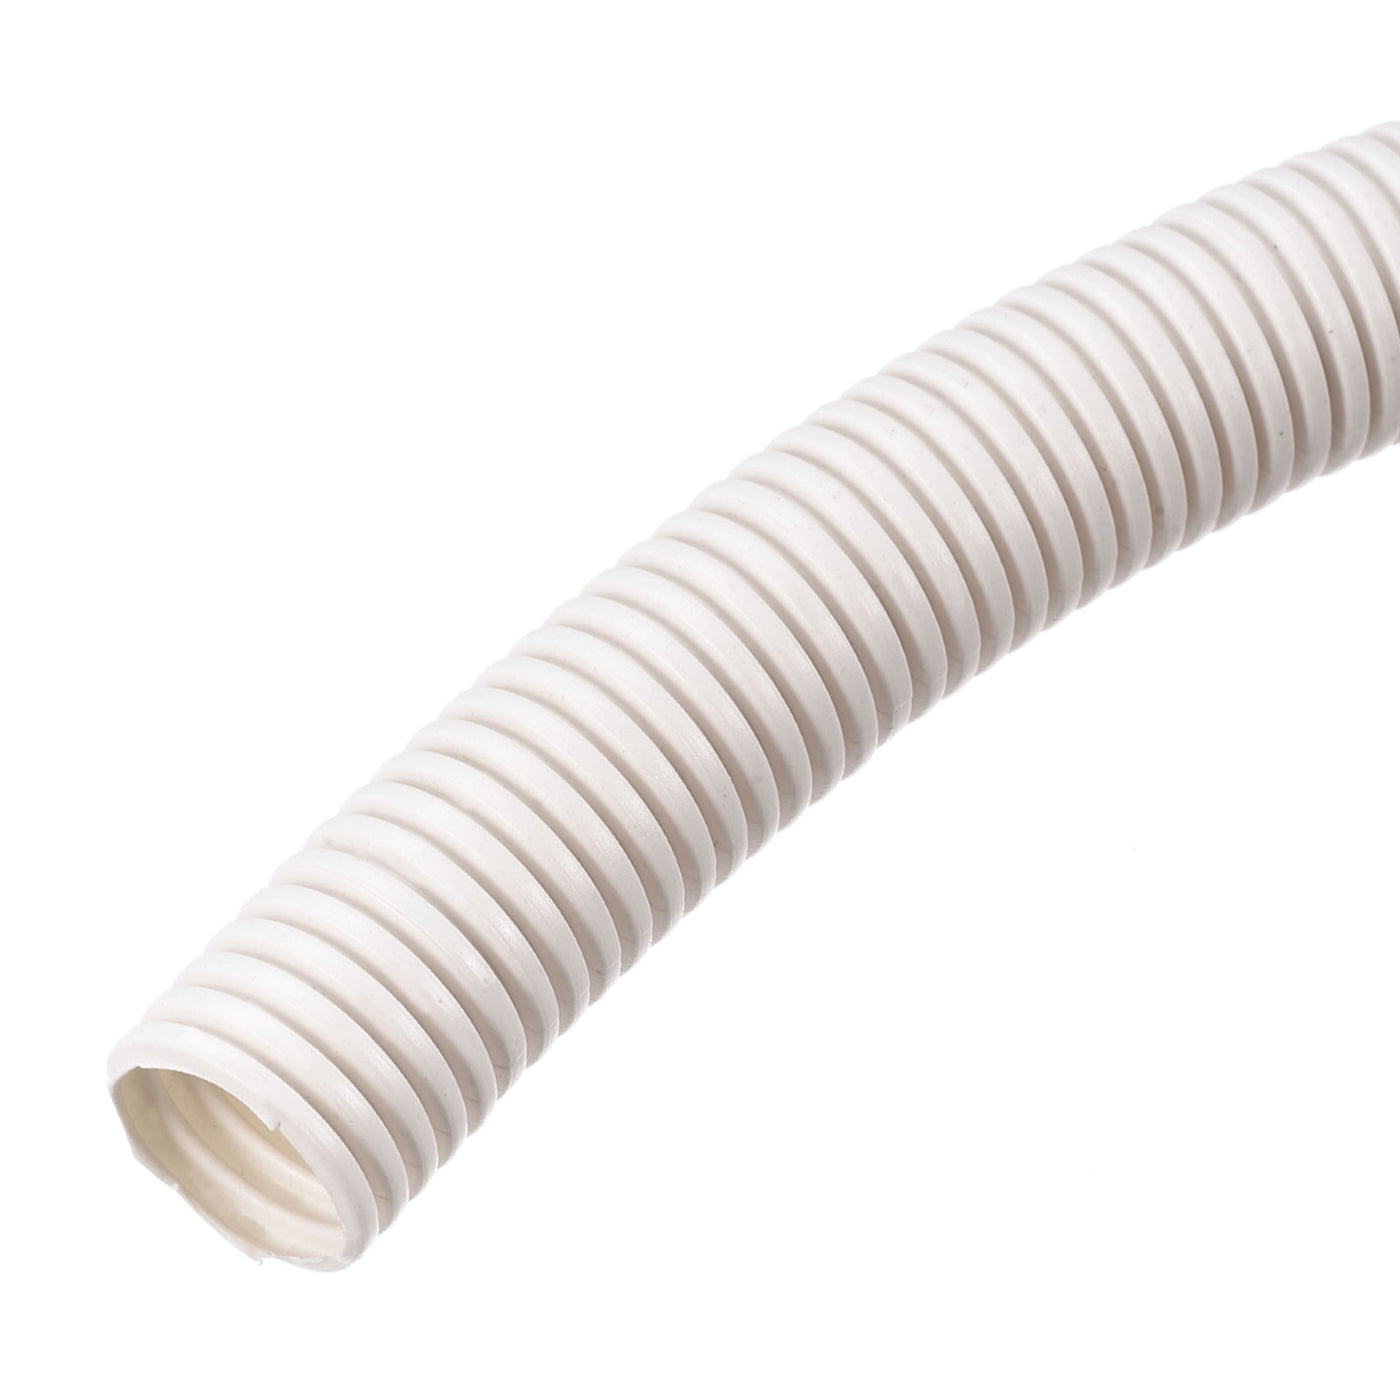 Harfington Wire Loom Tubing Corrugated Pipe Conduit, 4M/13ft Length 23x28.5mm White for Wire Cable